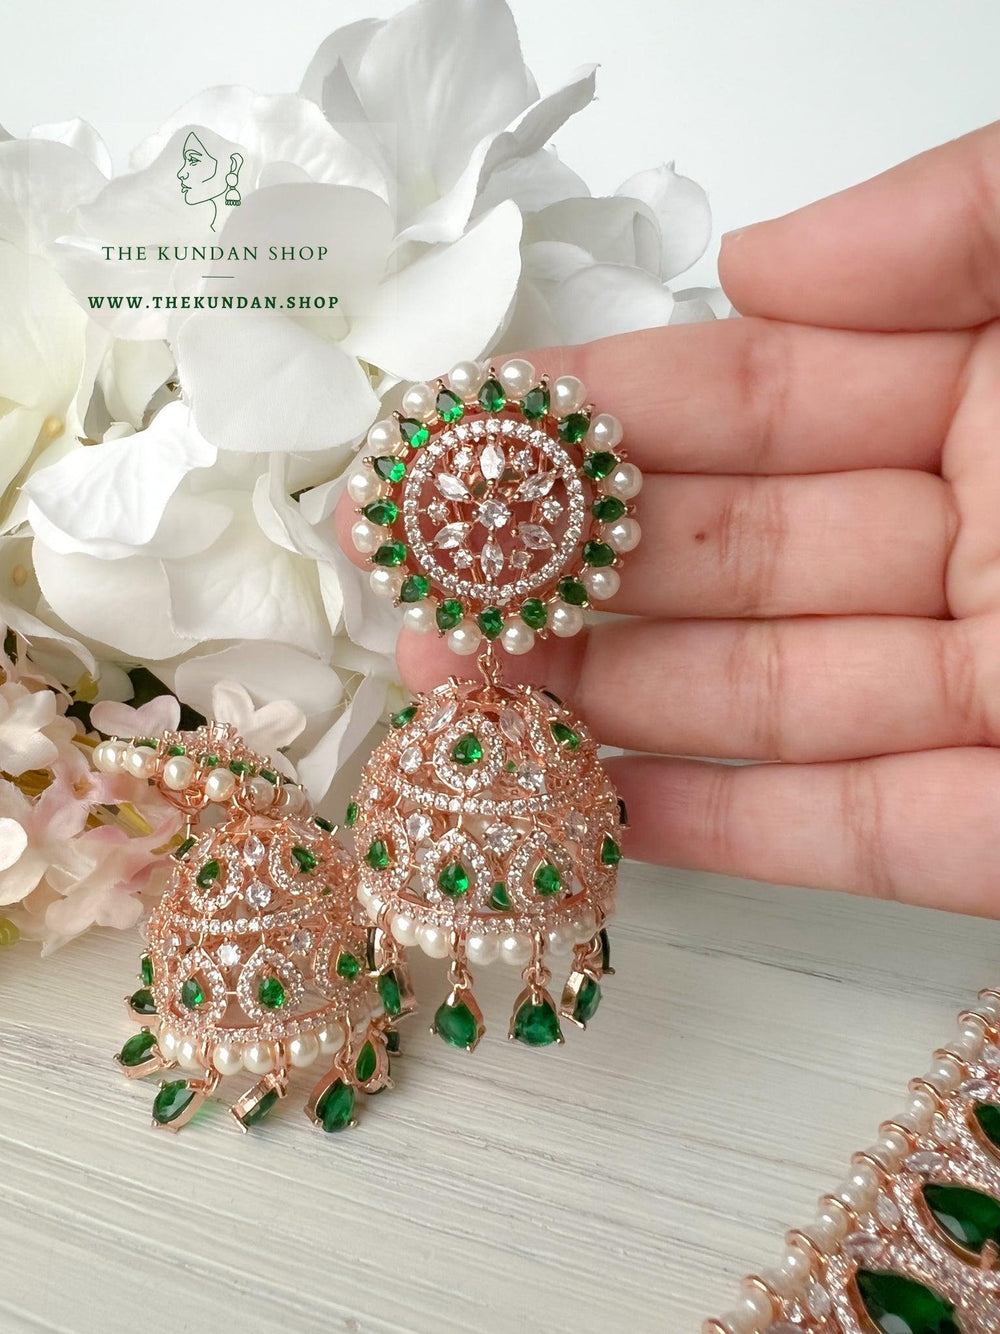 A Teardrop Stone in Rose Gold & Emerald Necklace Sets THE KUNDAN SHOP 